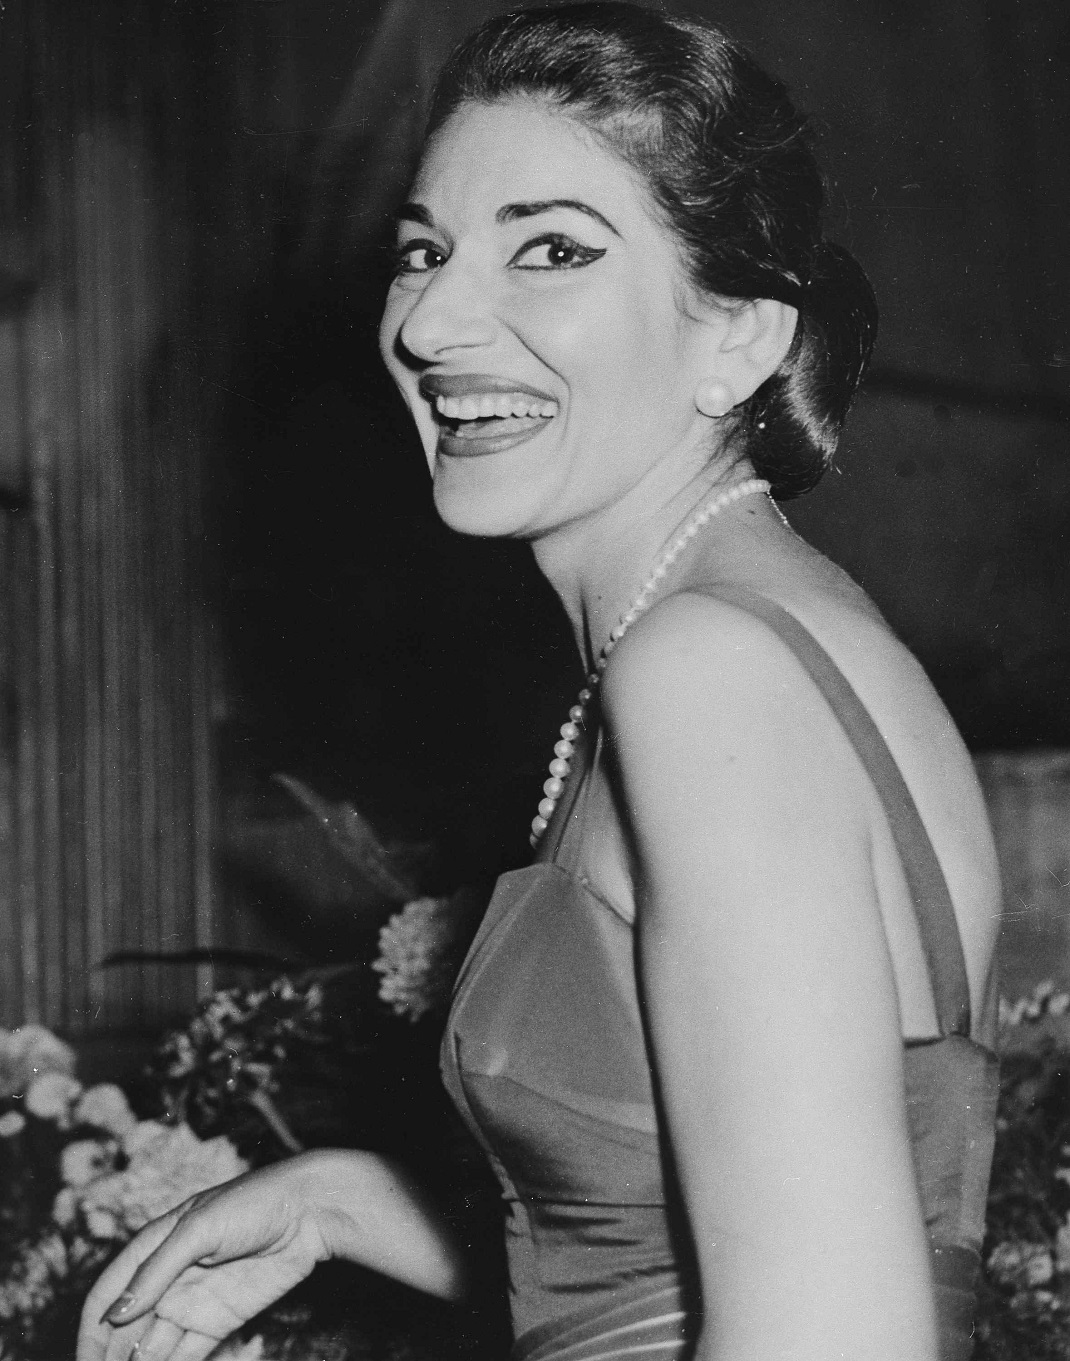 Famed Prima Donna Maria Meneghini Callas is in a happy mood during the intermission of her recital at Royal Festival Hall in London, Sept. 23, 1959. (AP Photo/Bob Dear)